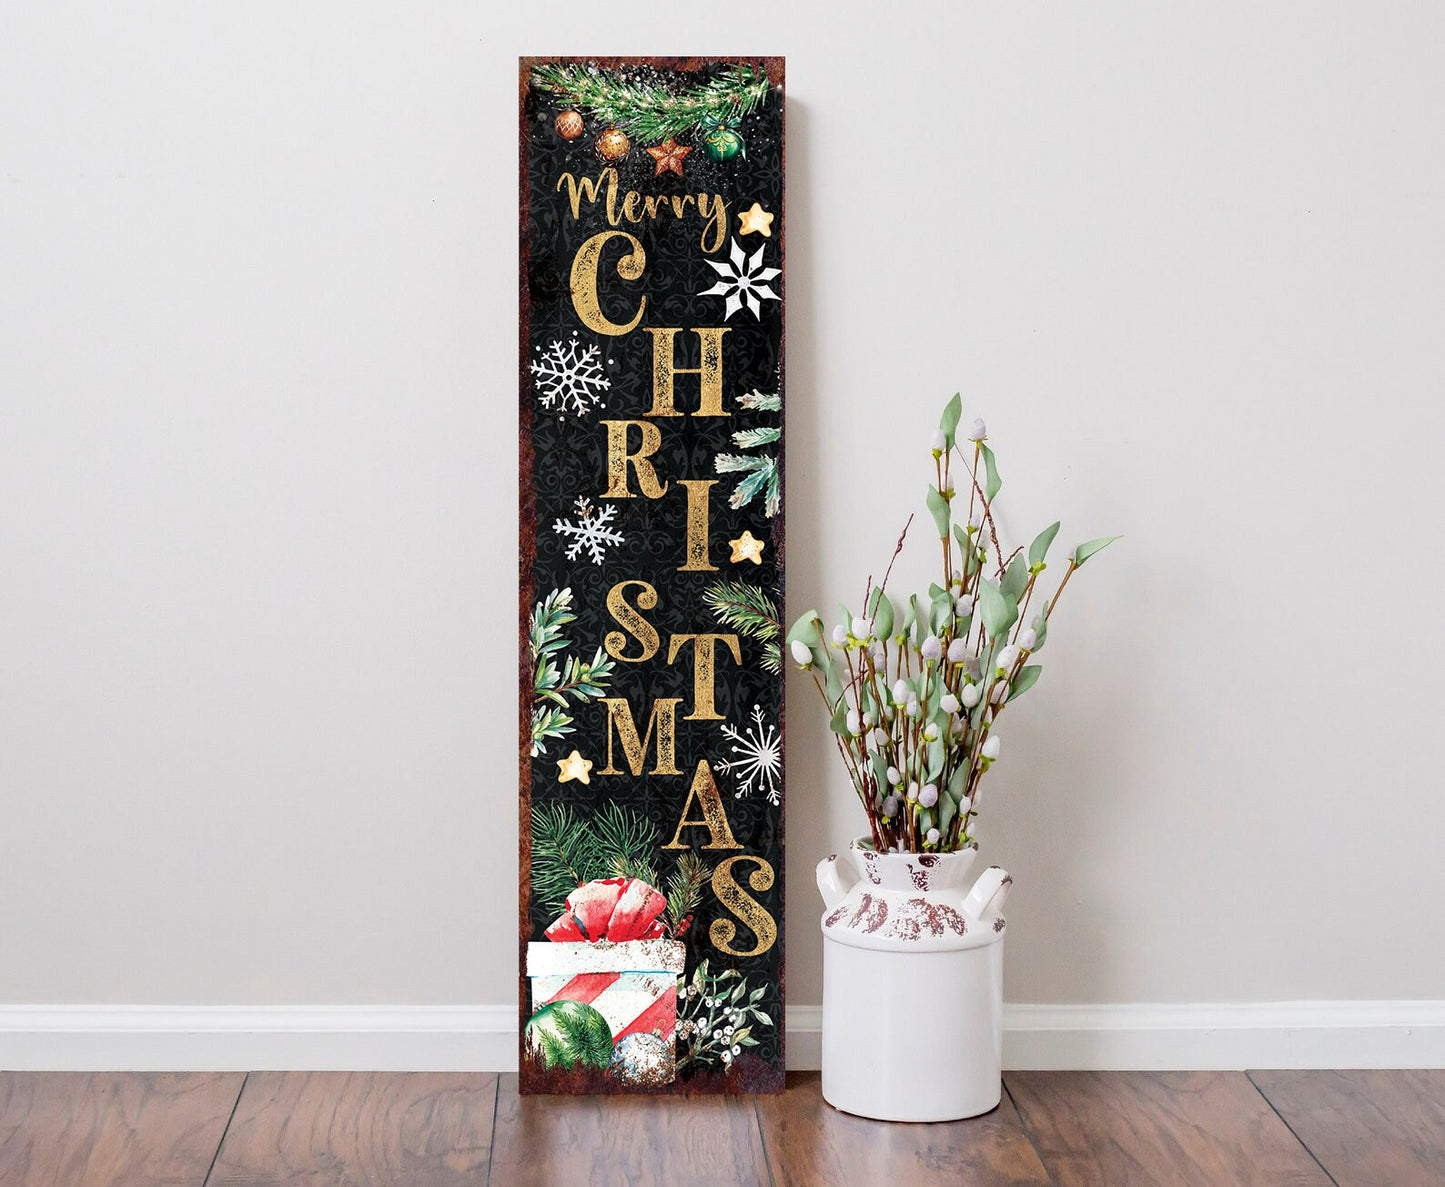 36in Merry Christmas Sign for Front Porch - Vintage Christmas Decoration, Rustic Modern Farmhouse Entryway Decor for Front Door